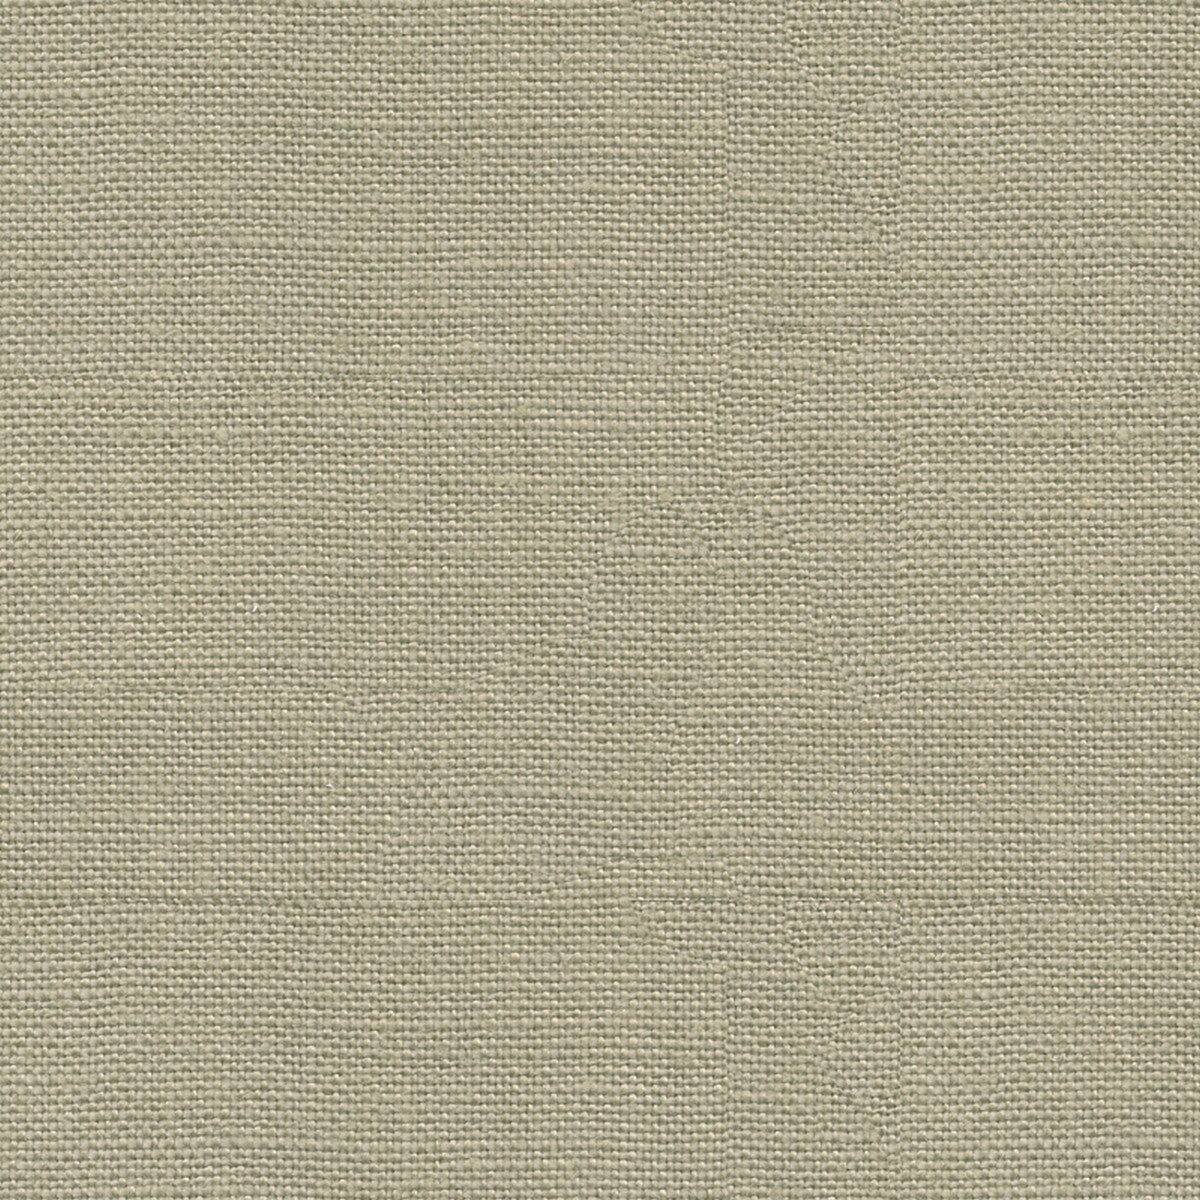 Newport fabric in dove grey color - pattern ED85116.910.0 - by Threads in the Variation collection